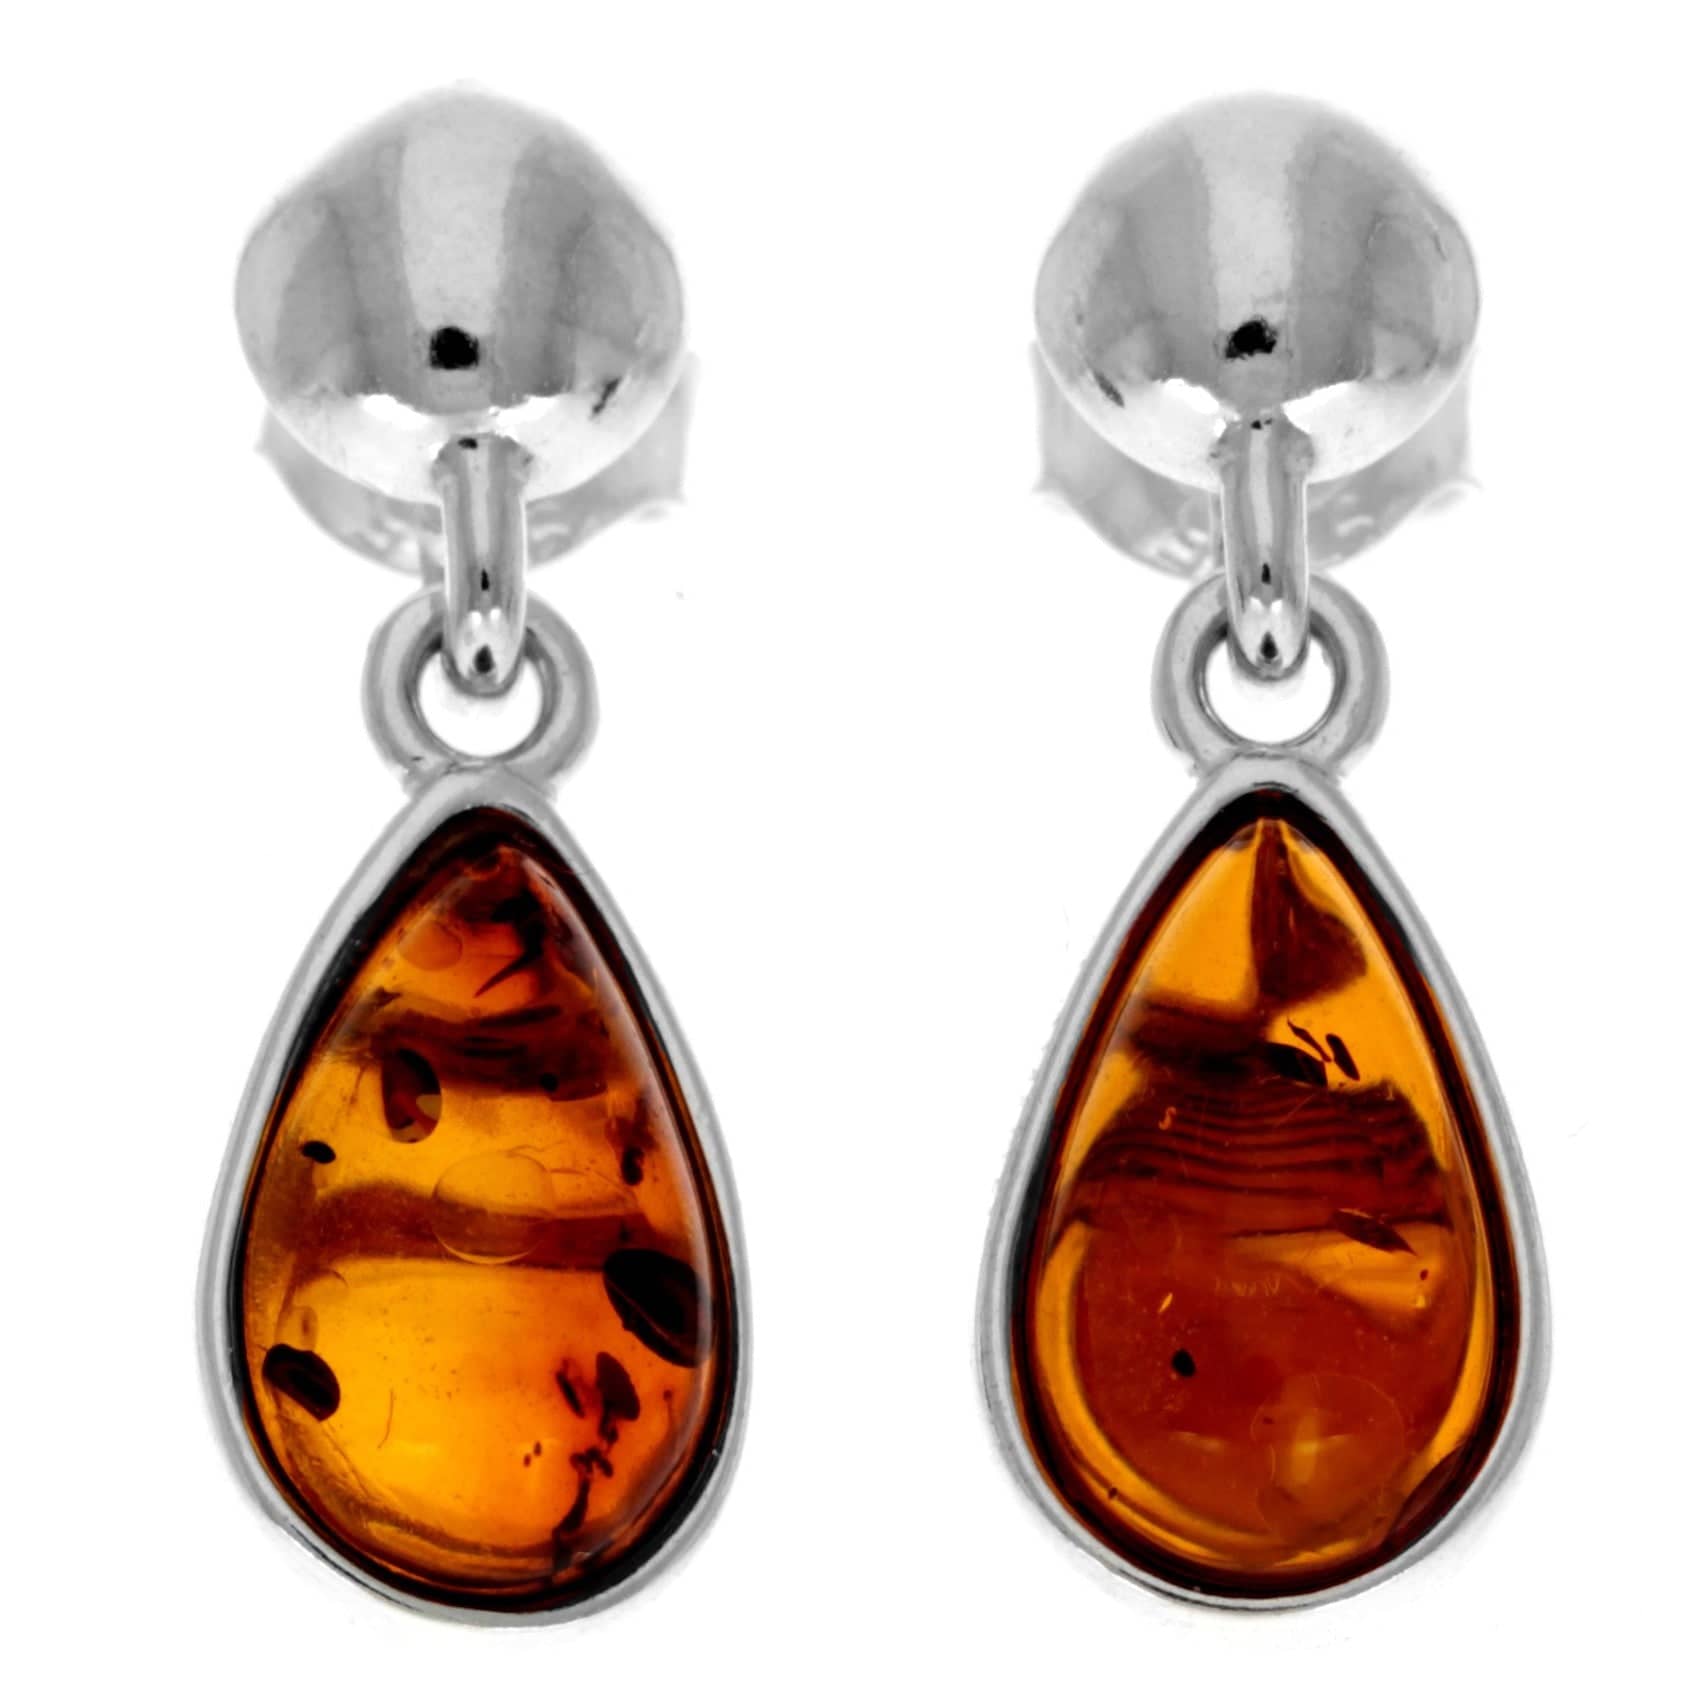 925 Sterling Silver & Genuine Baltic Amber Celtic Classic Drop Earrings - GL1010